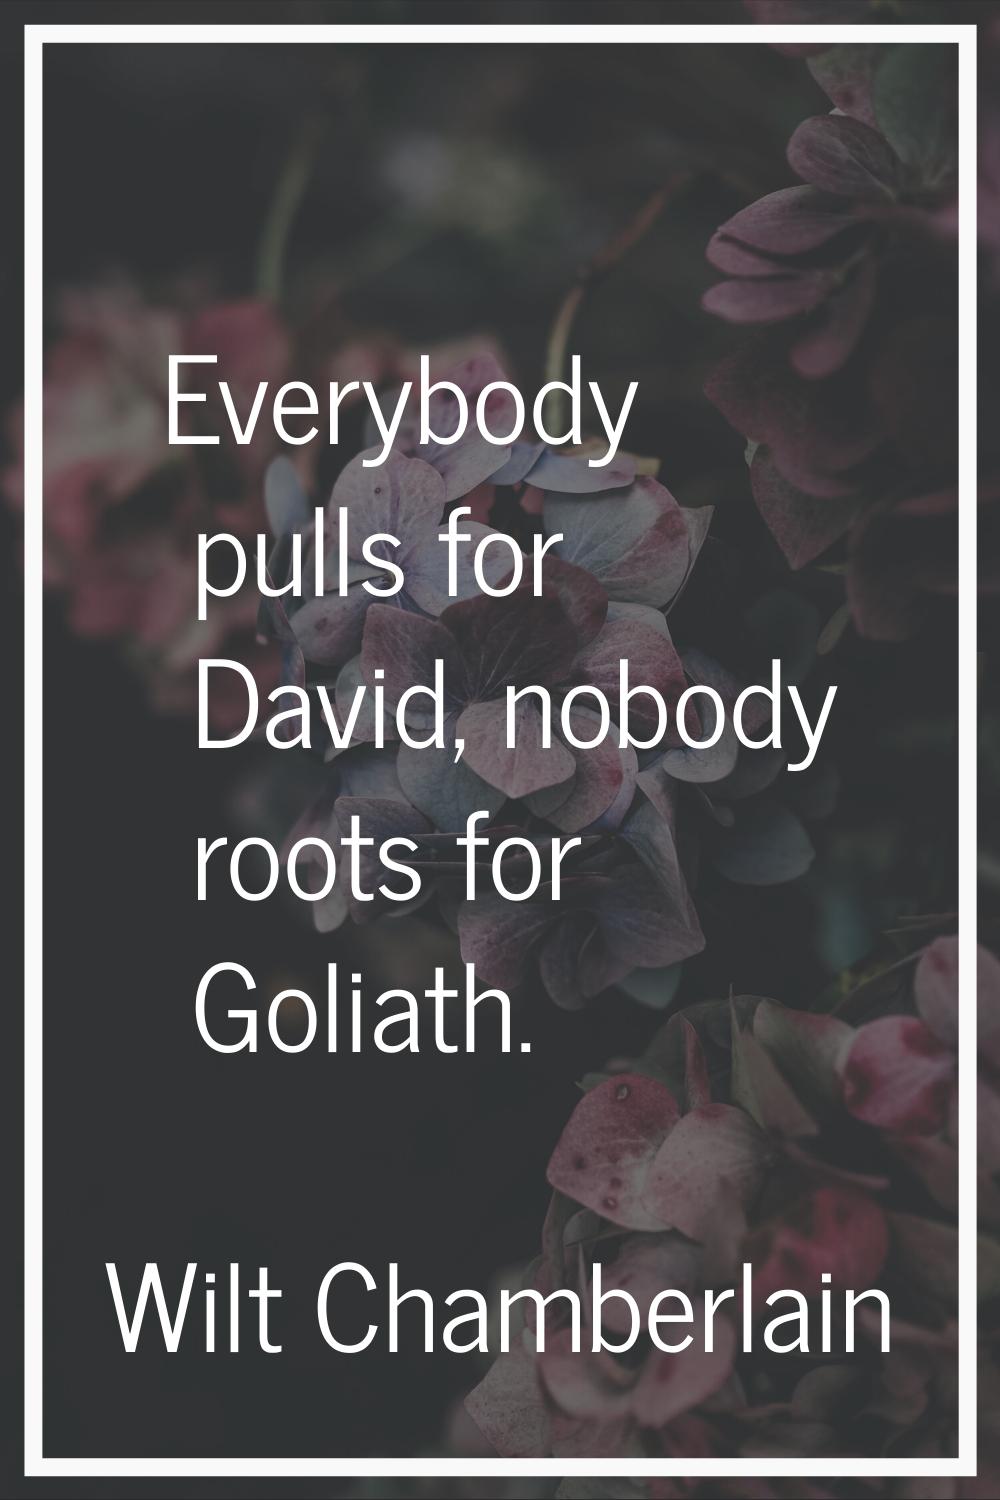 Everybody pulls for David, nobody roots for Goliath.